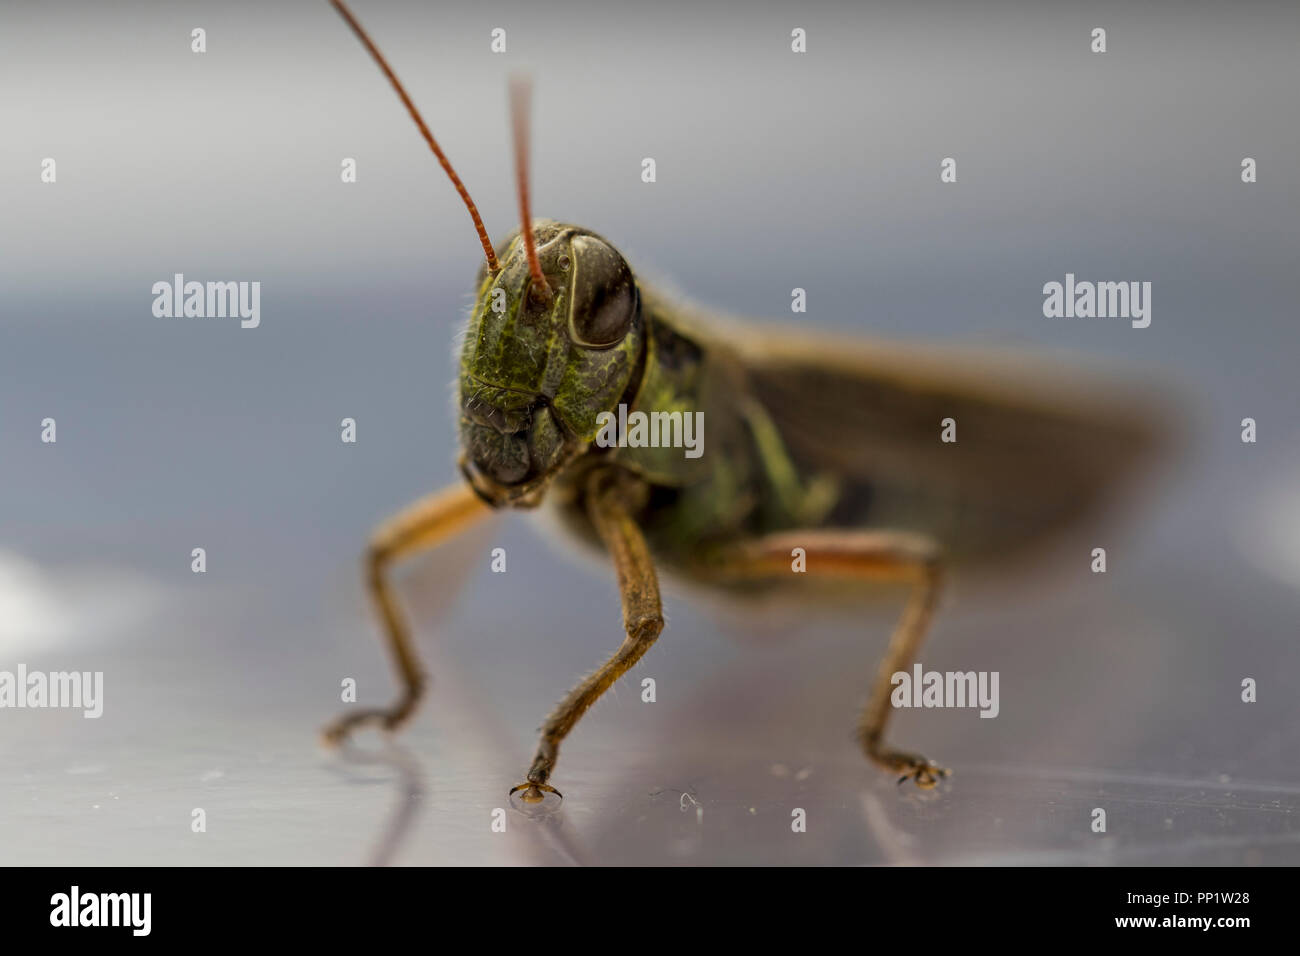 Close up of camouflaged Katydid grasshopper. Caelifera head with big eyes, antenna and legs. Stock Photo